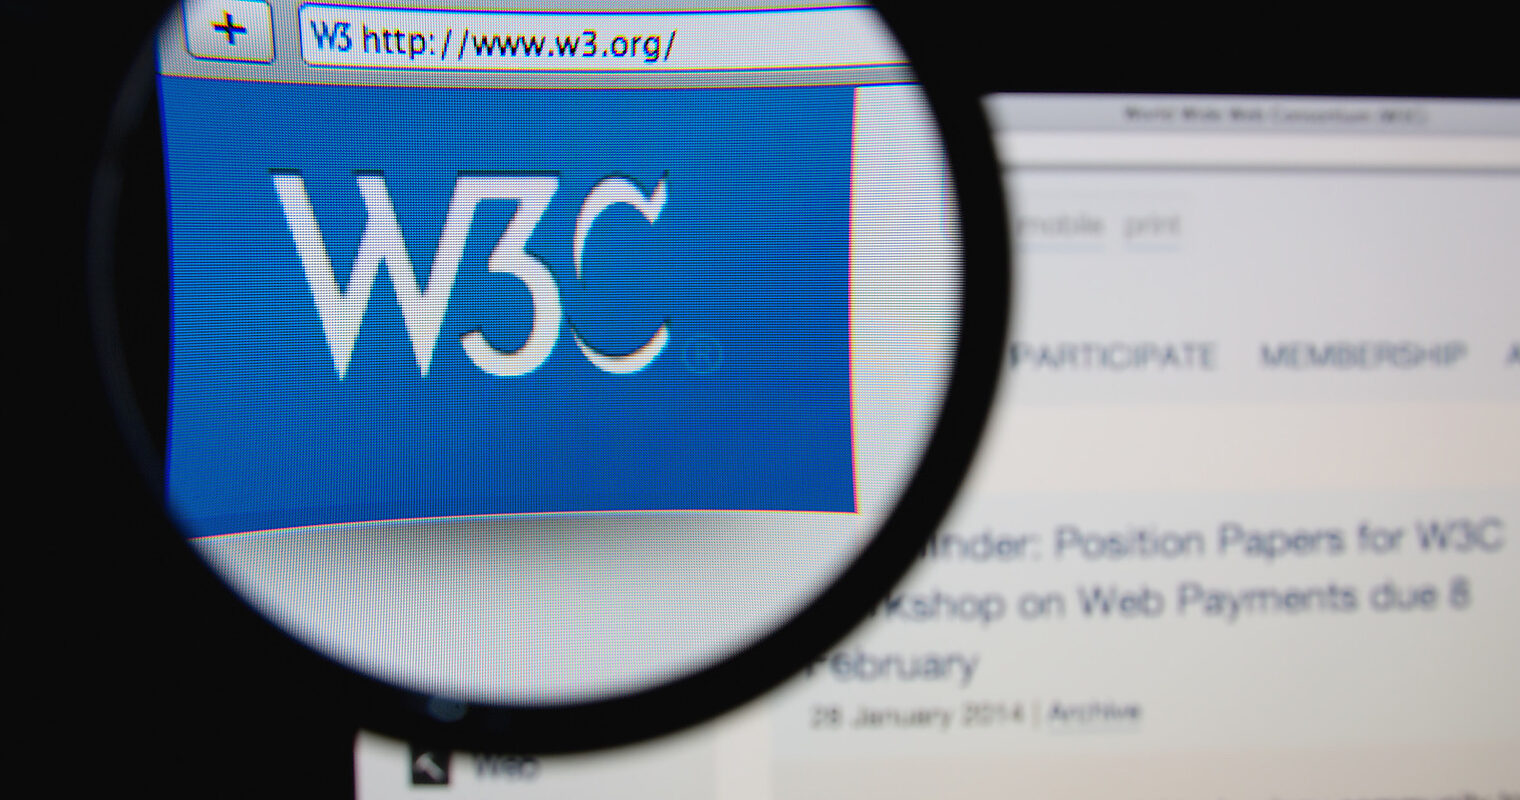 Google’s John Mueller: We Do Not Use W3C Validation in Search Results